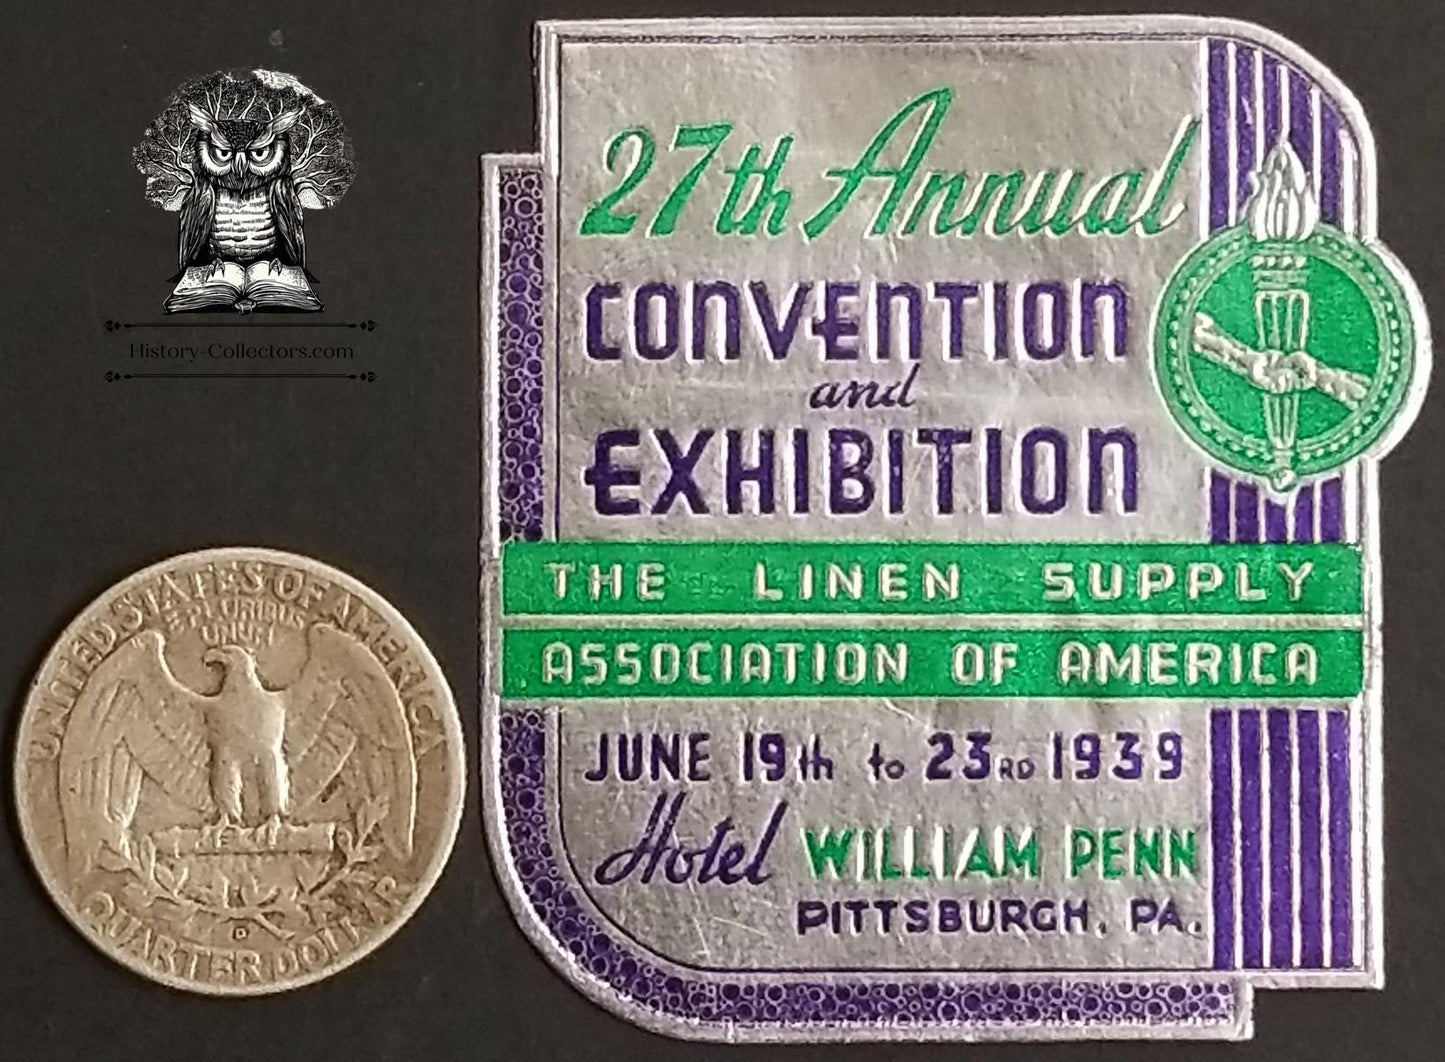 1939 Linen Supply Association Convention Exhibition Advertising Seal - Hotel William Penn Pittsburgh PA